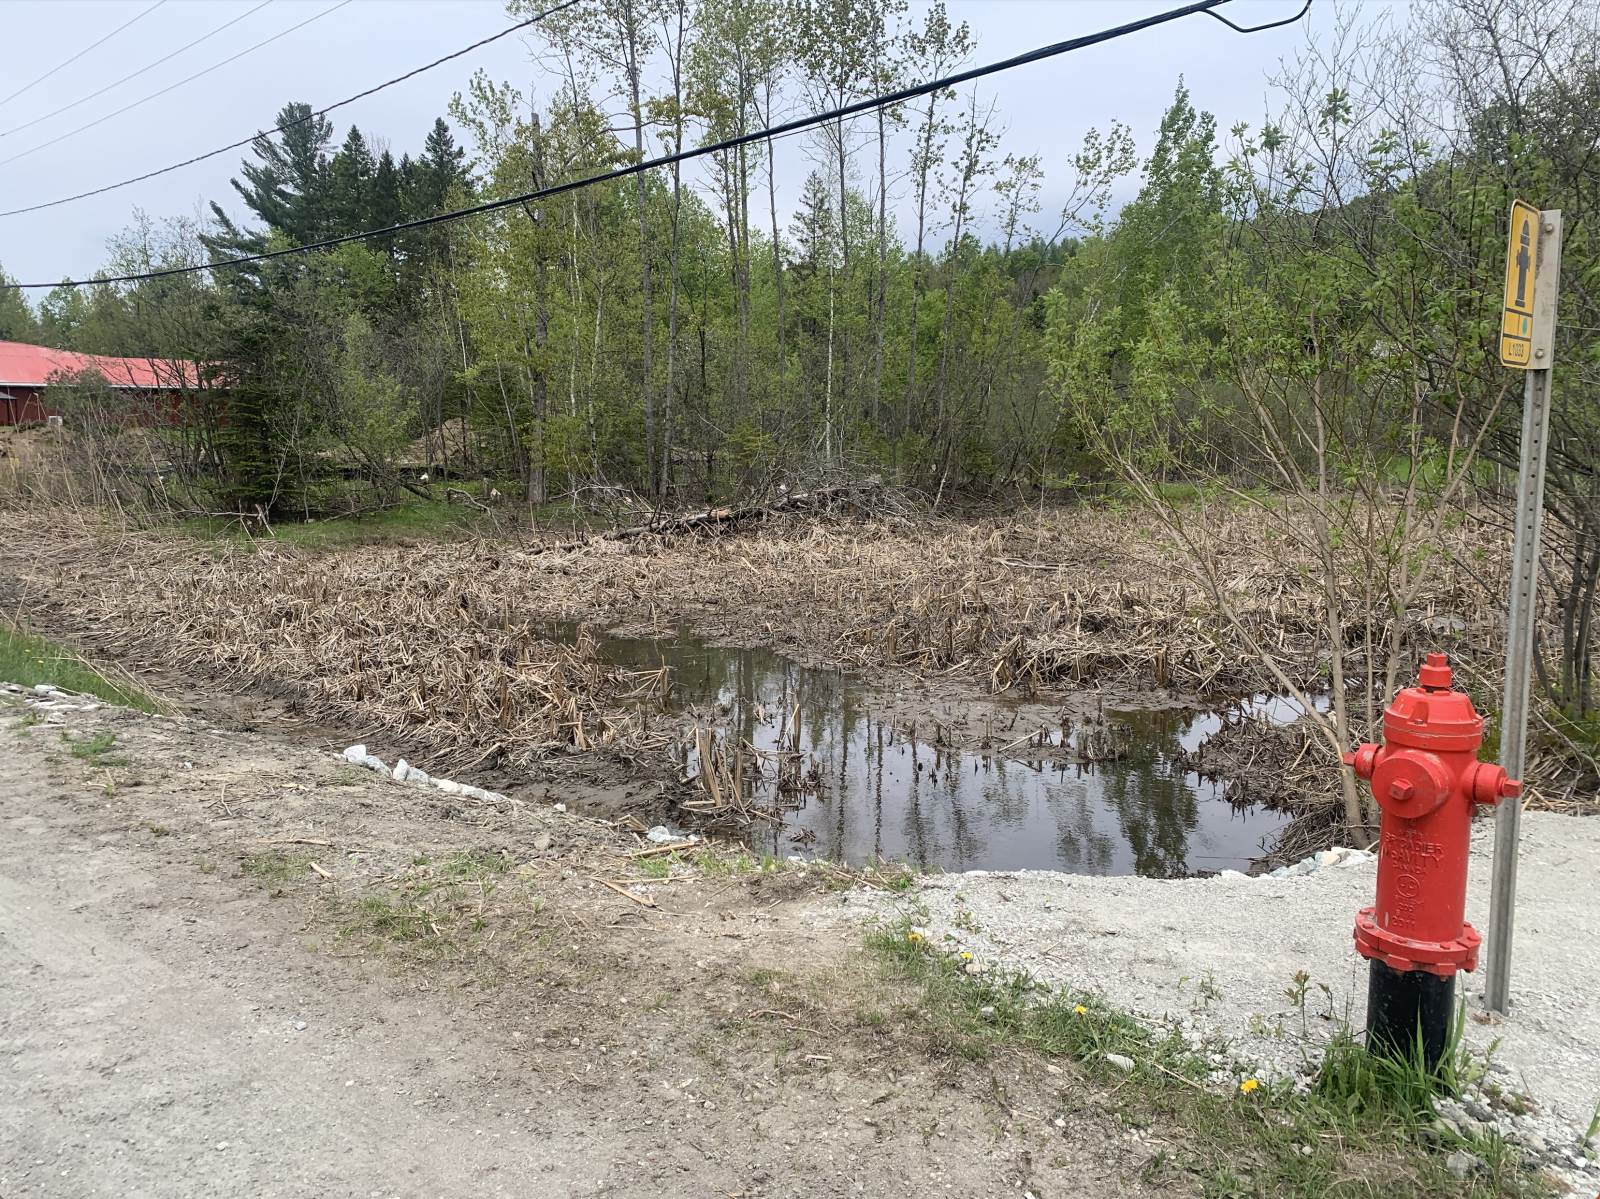 City of Sherbrooke drains Lennoxville swamp